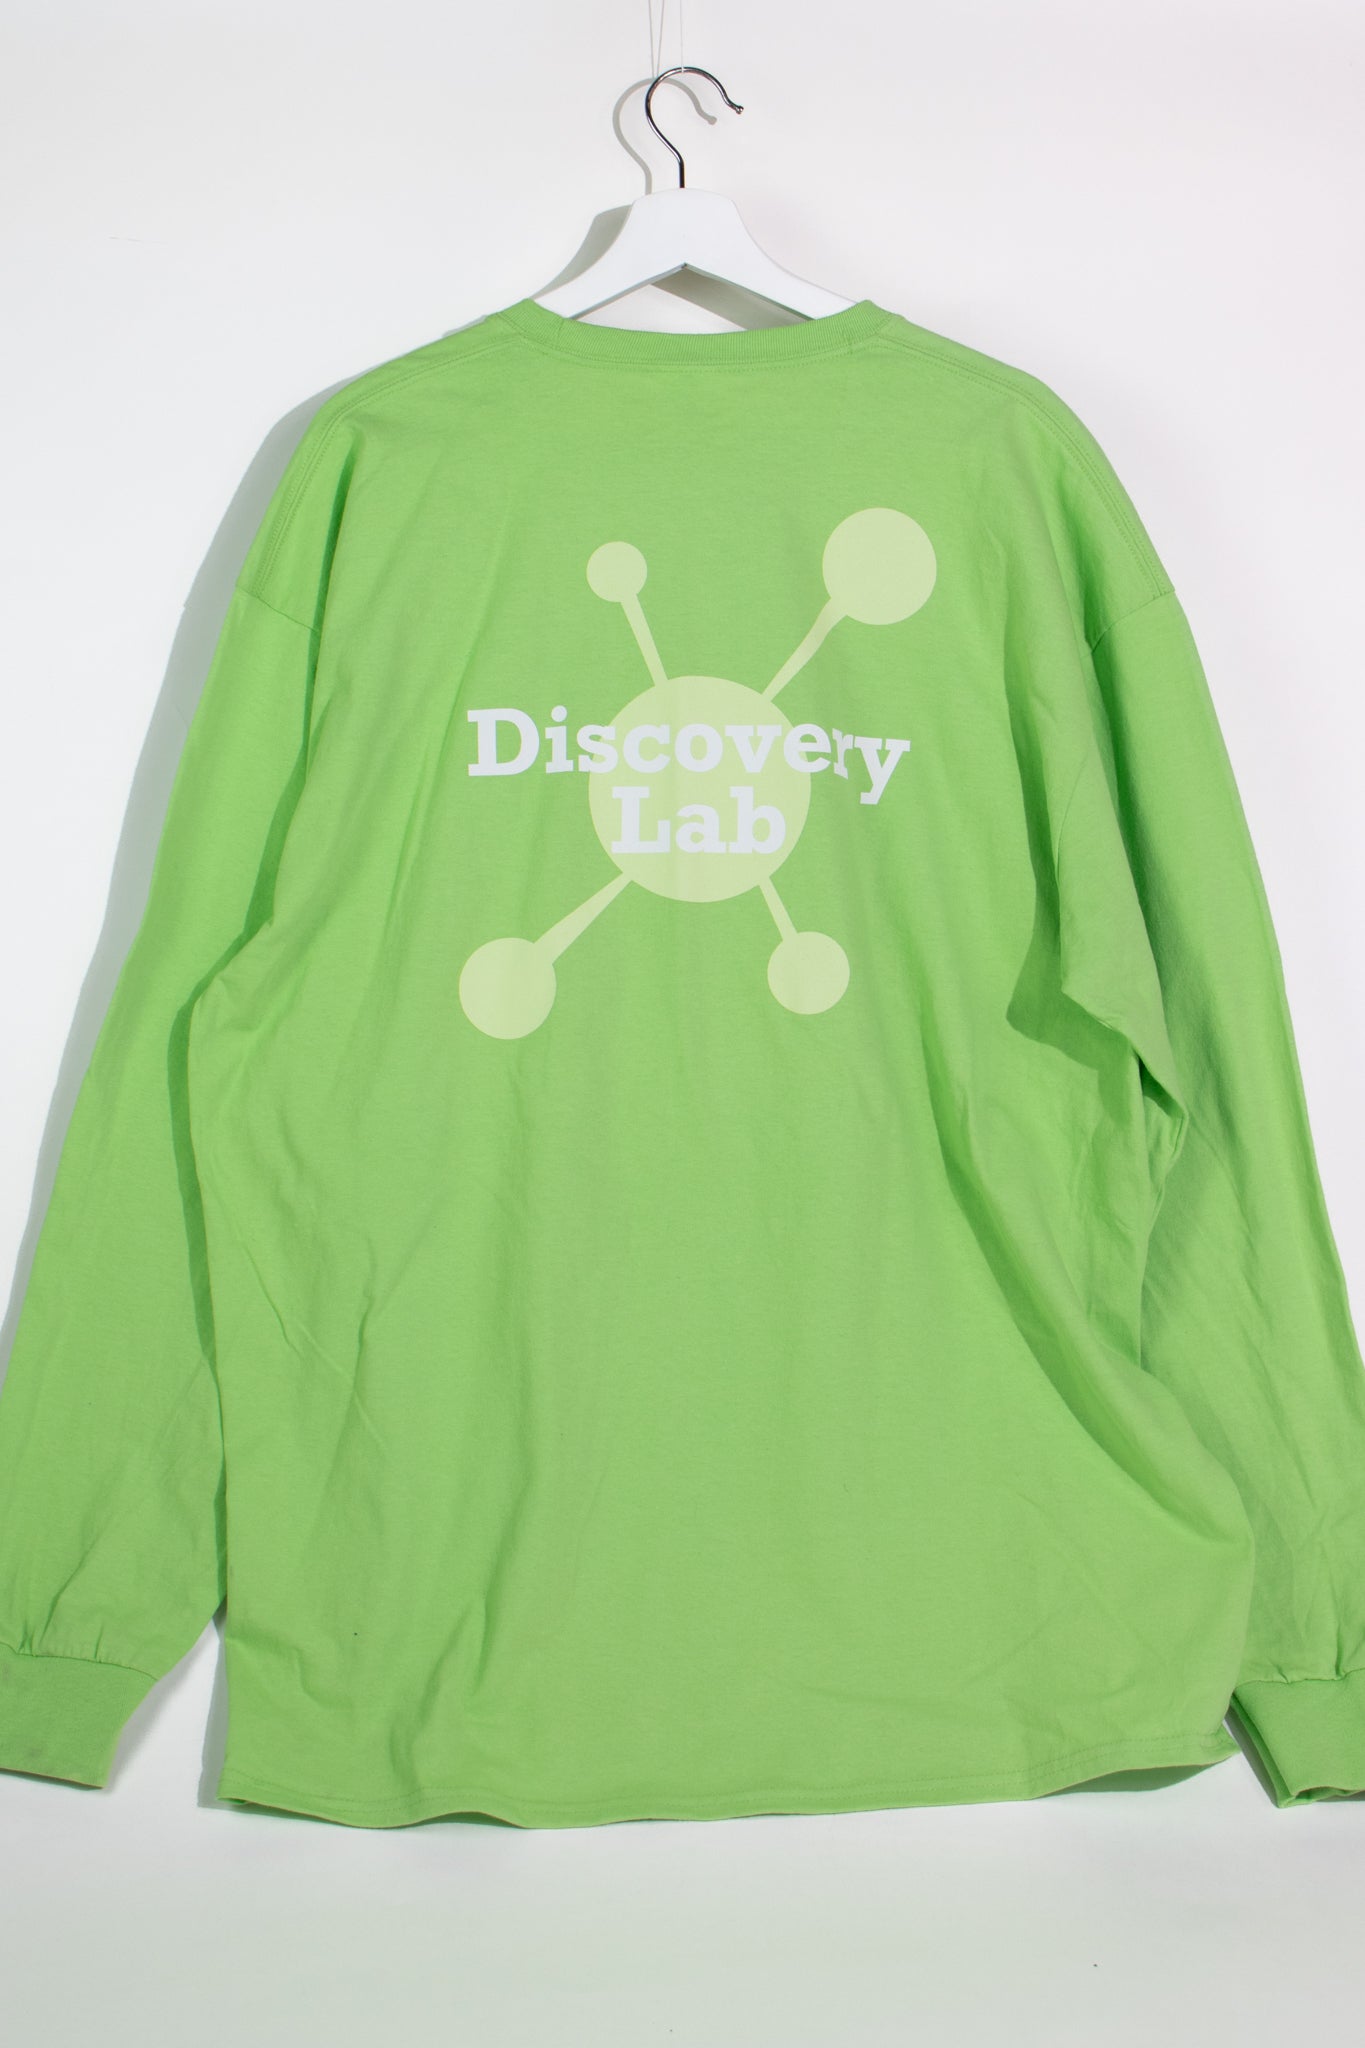 Discovery Lab Long Sleeve Tee - Lime - Stemcell Science Shop